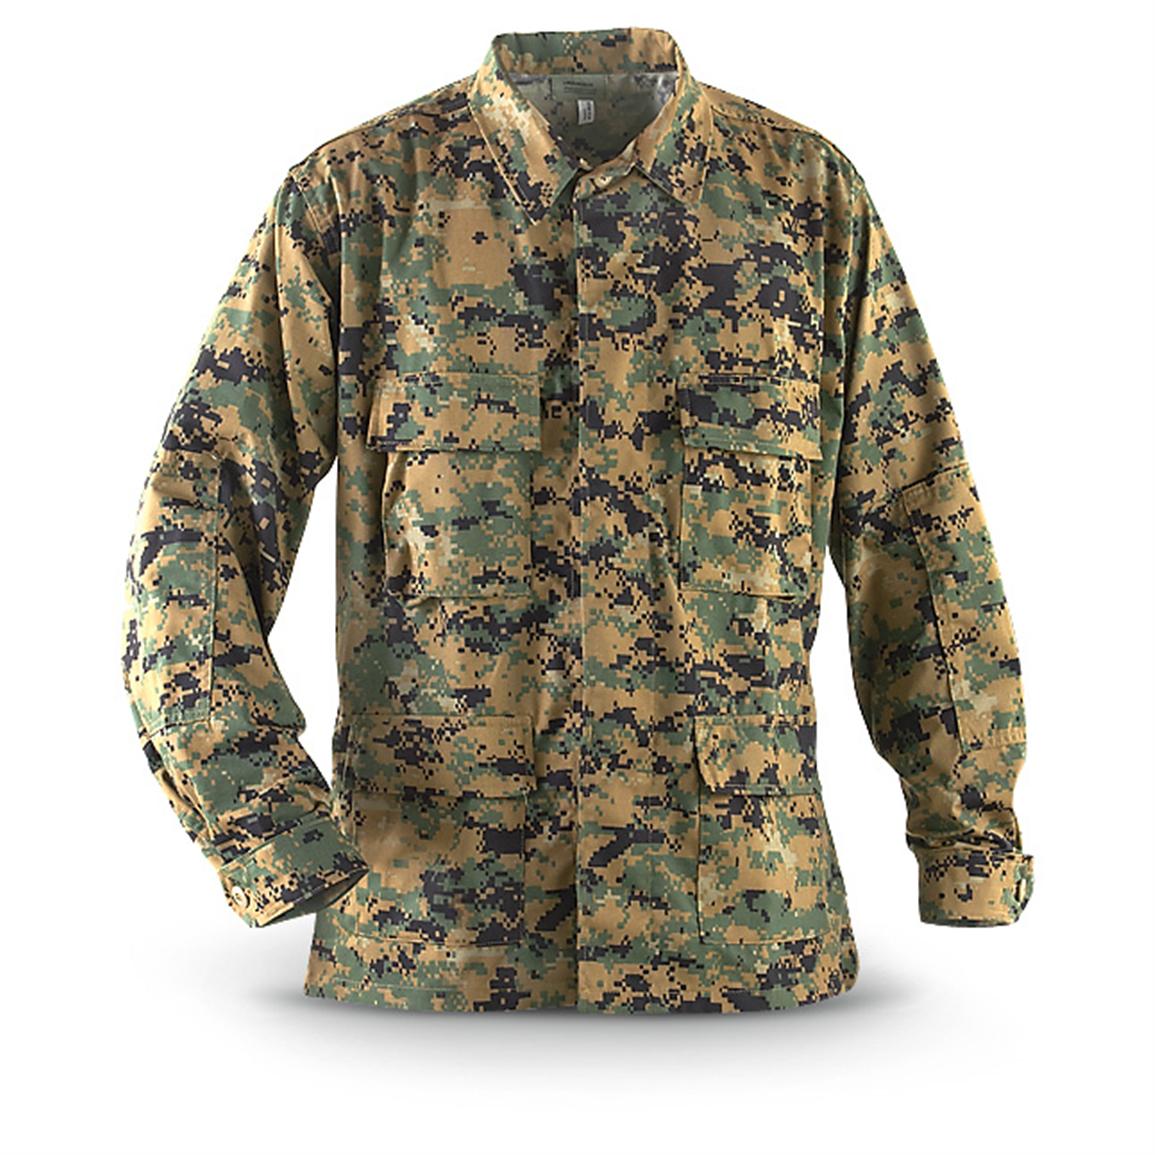 HQ ISSUE™ BDU Military-style Shirt - 227883, Tactical Clothing at ...